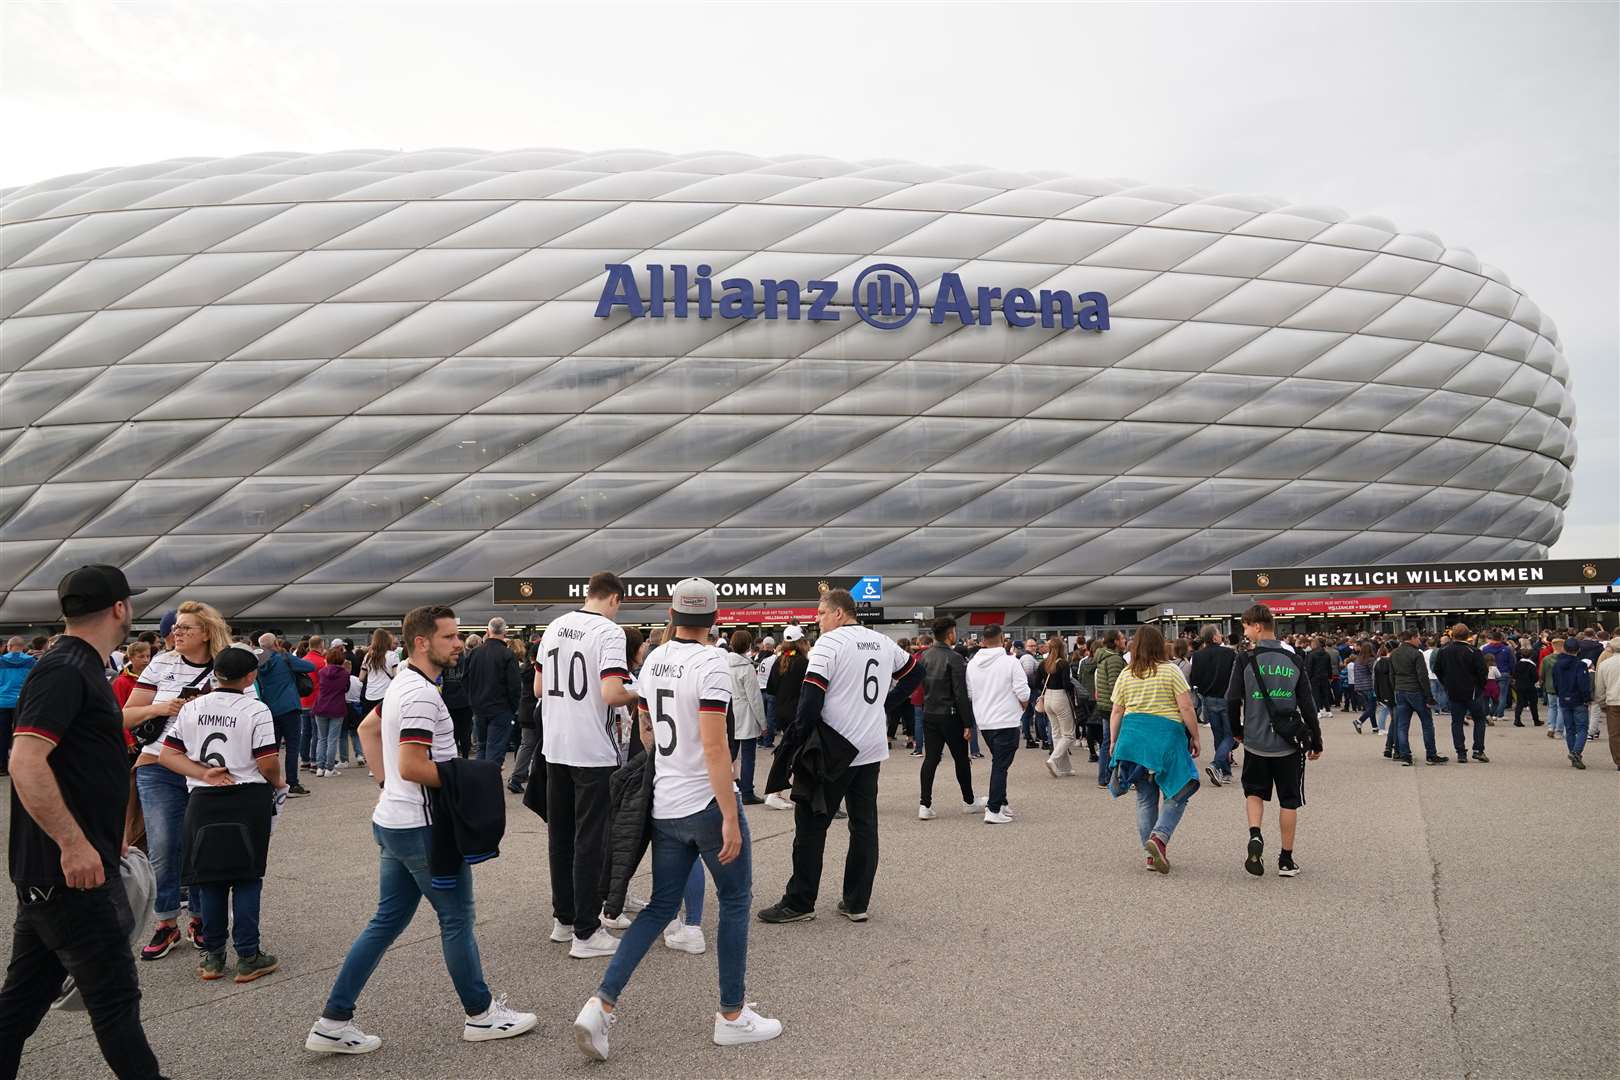 Football fans arriving at the Allianz Arena in Munich for the Germany v England game (Yui Mok/PA)